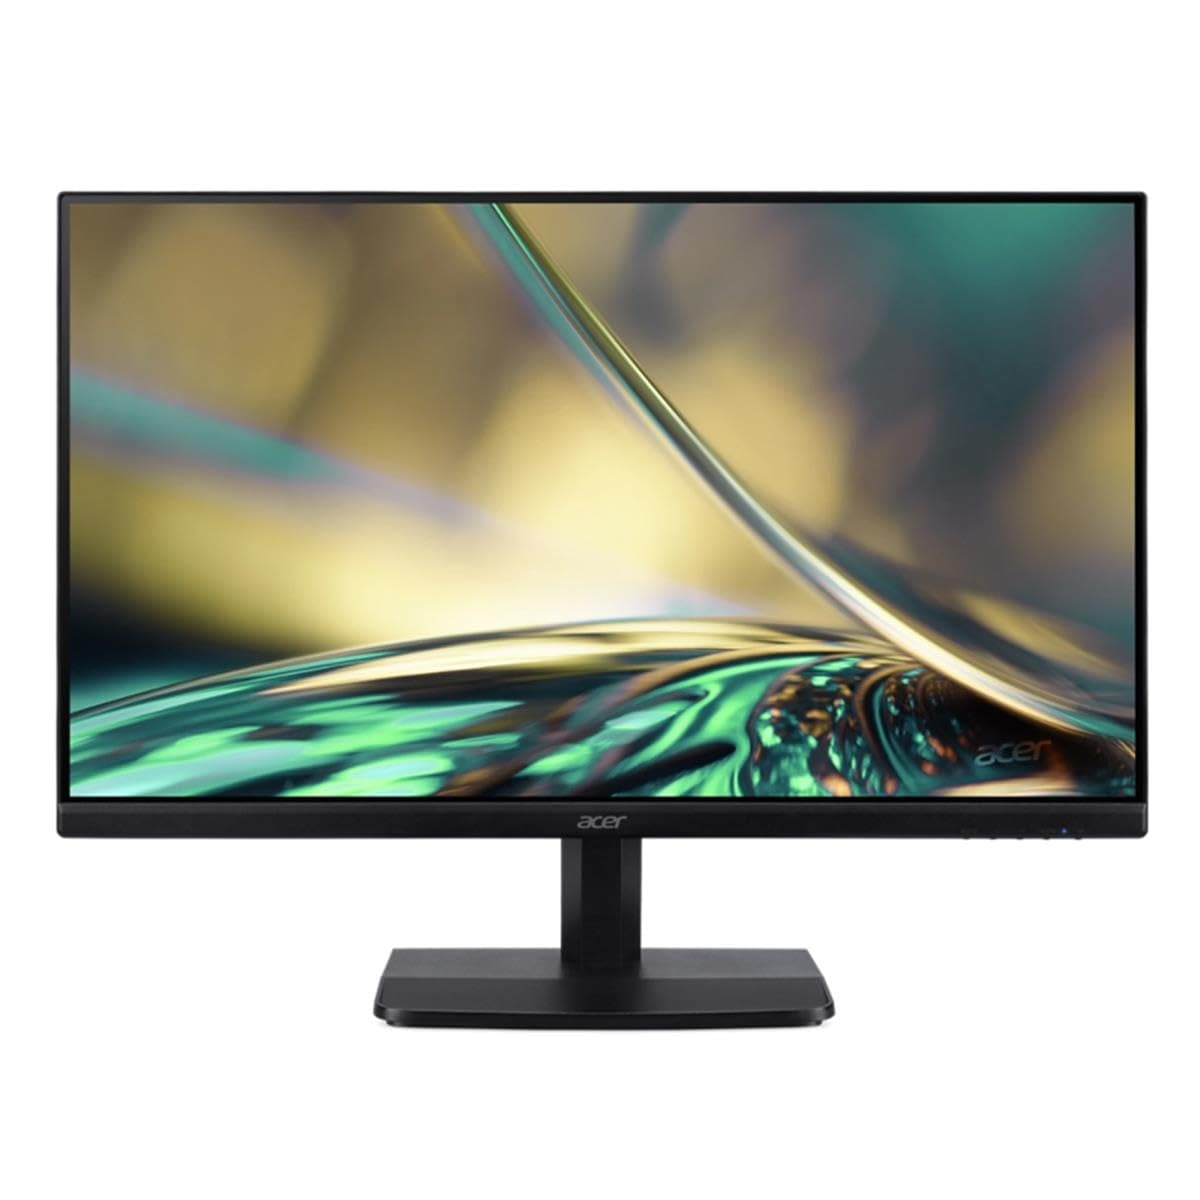 Picture of Acer UM.HV0AA.010 27 in. VT270 LCD Touchscreen Monitor - 16-9 - 4 ms GTG - 1920 x 1080 - Full HD - In-plane Switching Technology - 16.7 Million Colors - 300 Nit - LED Backlight, Black